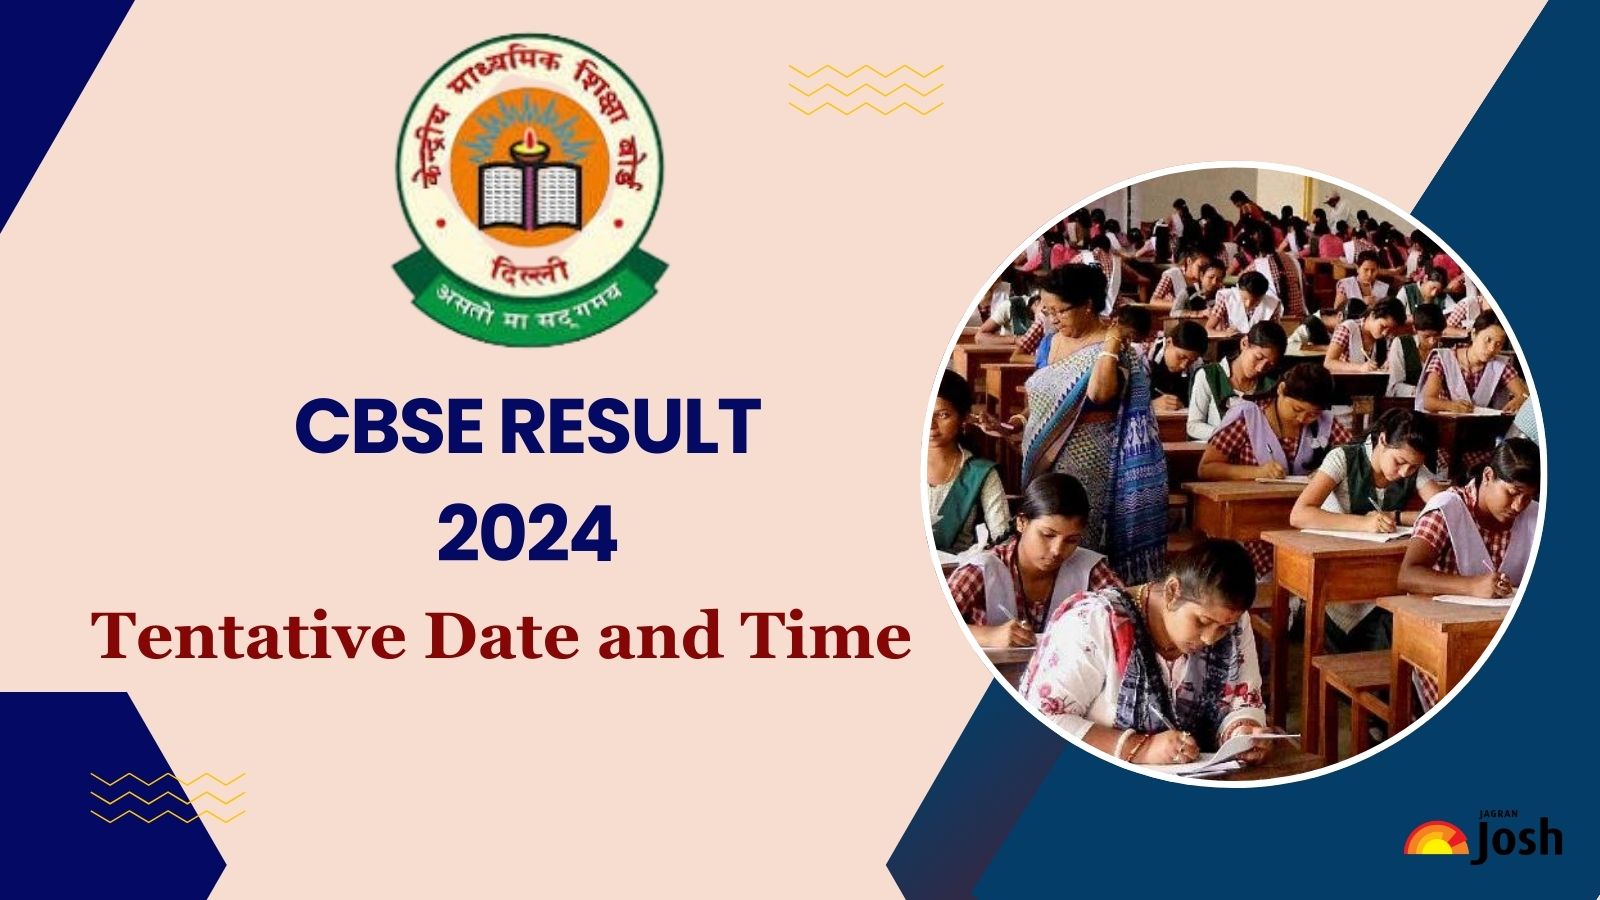 [Breaking News] CBSE Board Result 2024 Officially Announced, 10th 12th Results Likely to be Declared after 20 May